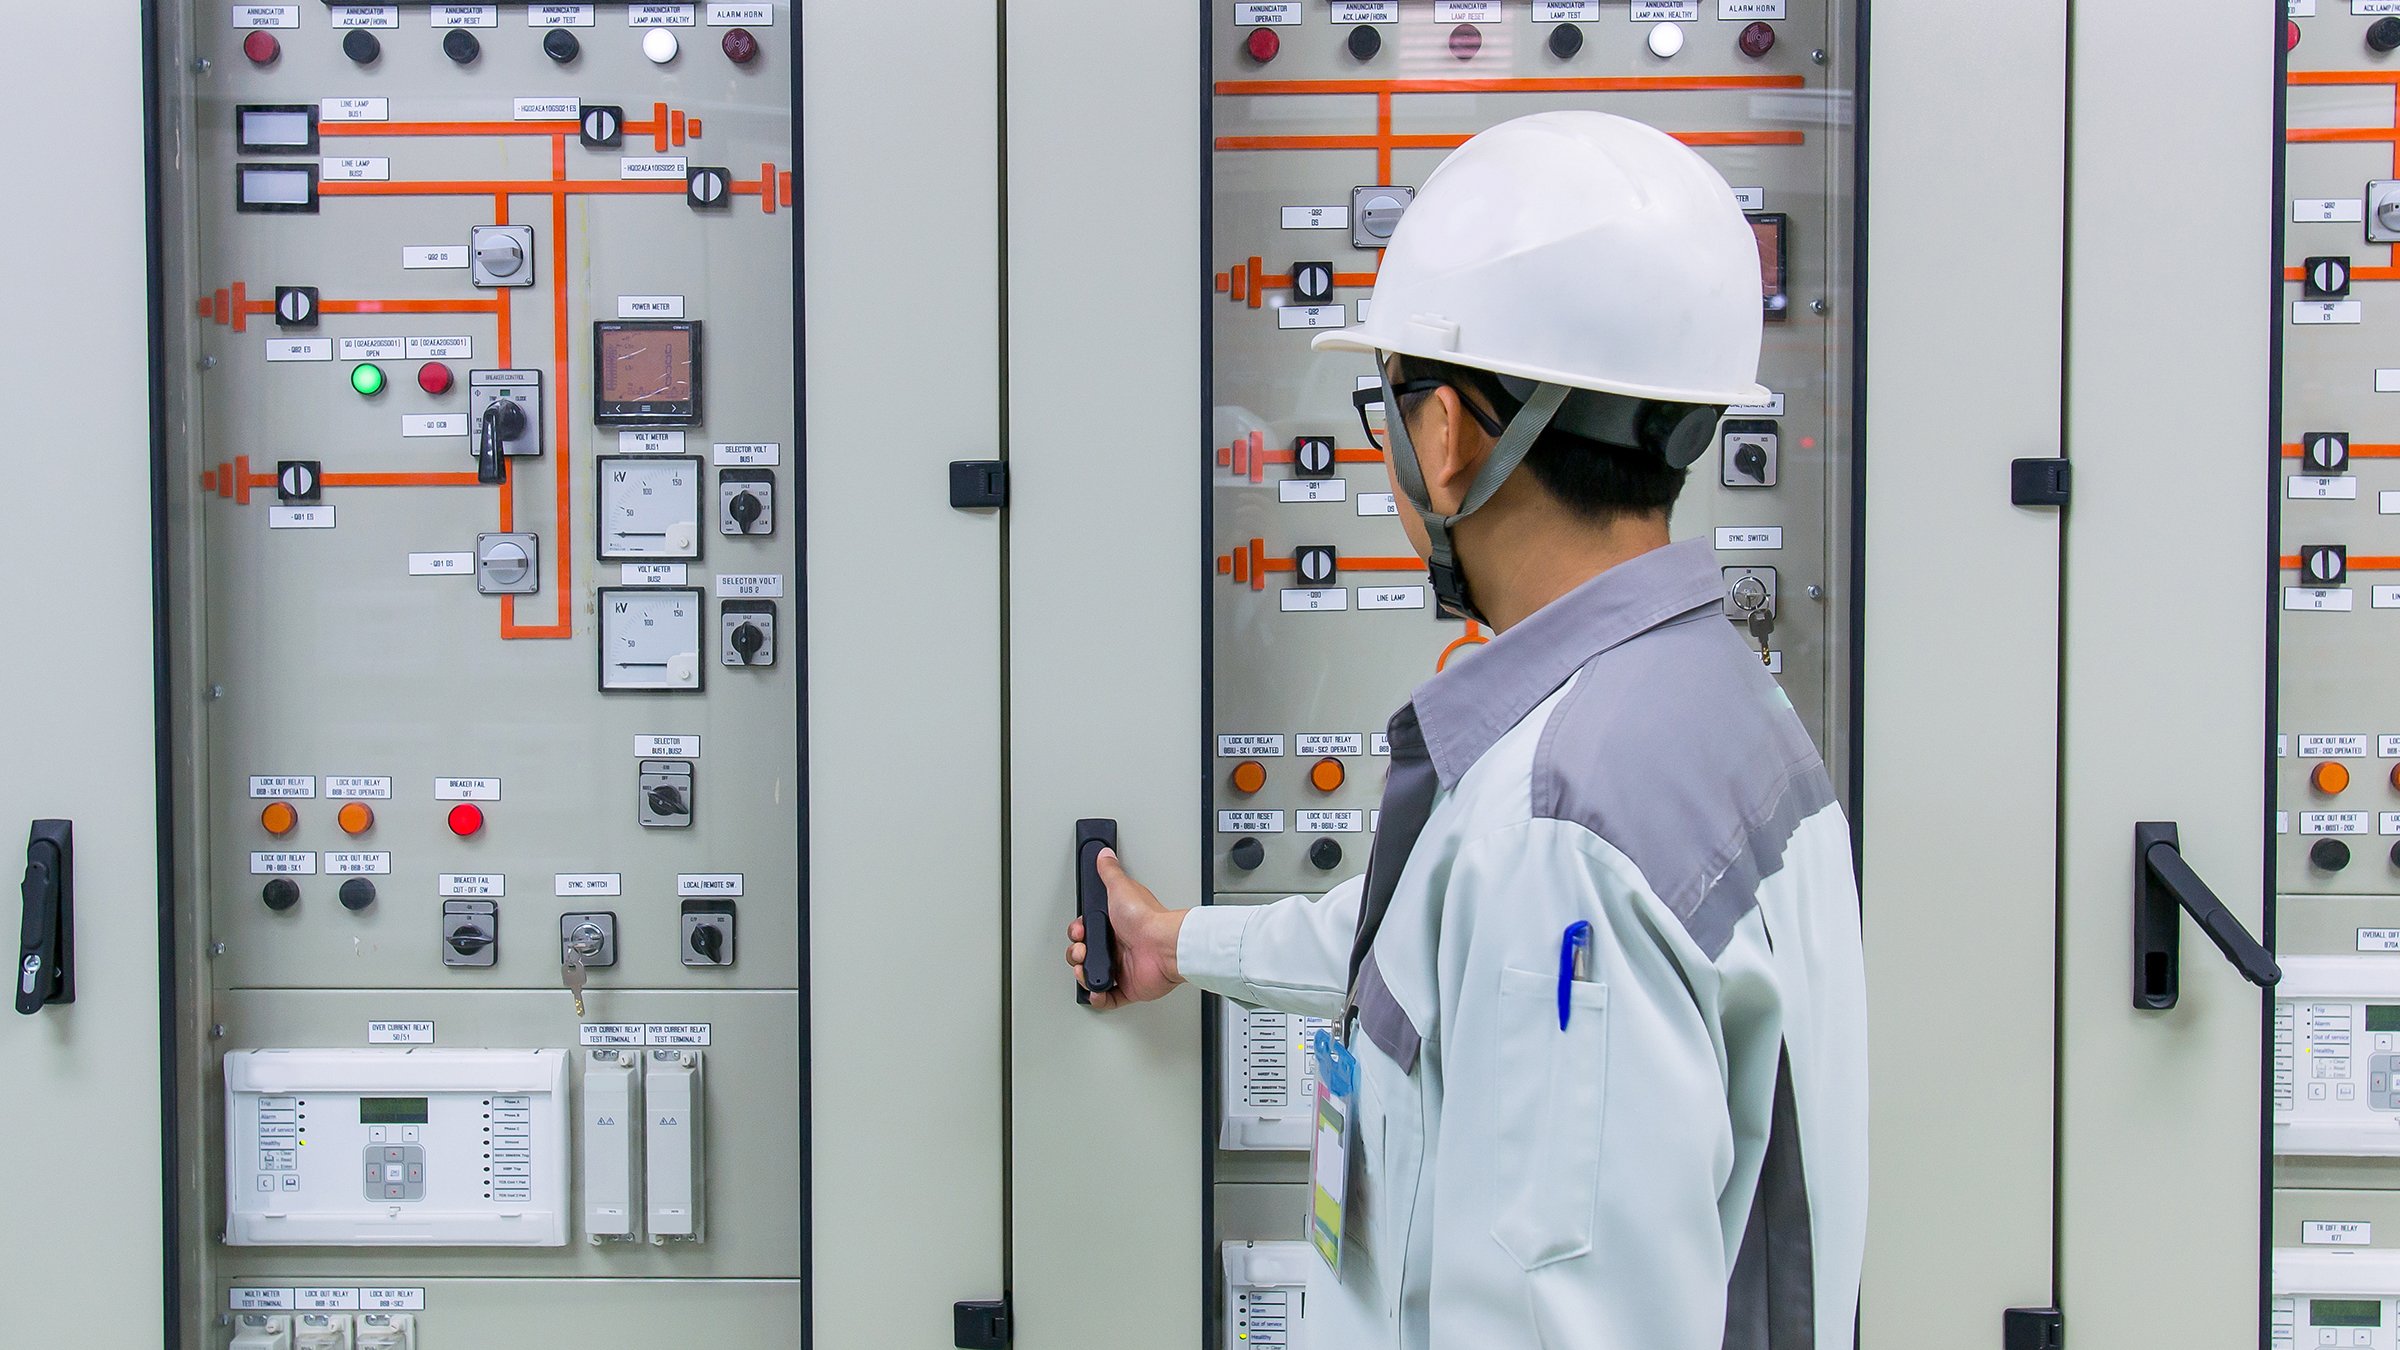 Engineer in front of 115kV control protection panel at power plant